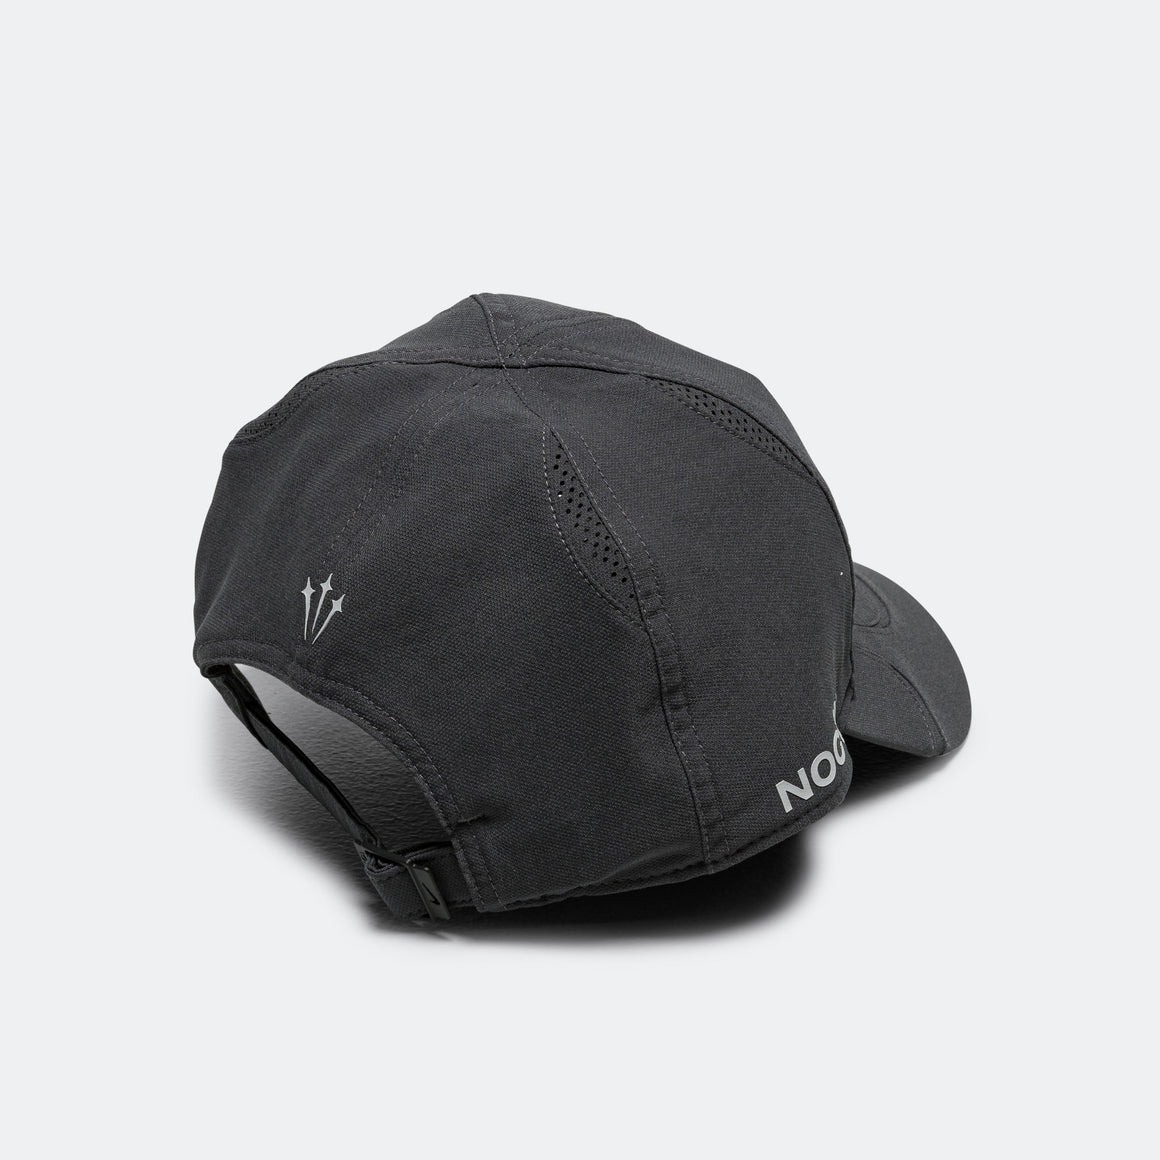 Nike - NOCTA Cardinal Club Cap - Anthracite/Wolf Grey - UP THERE